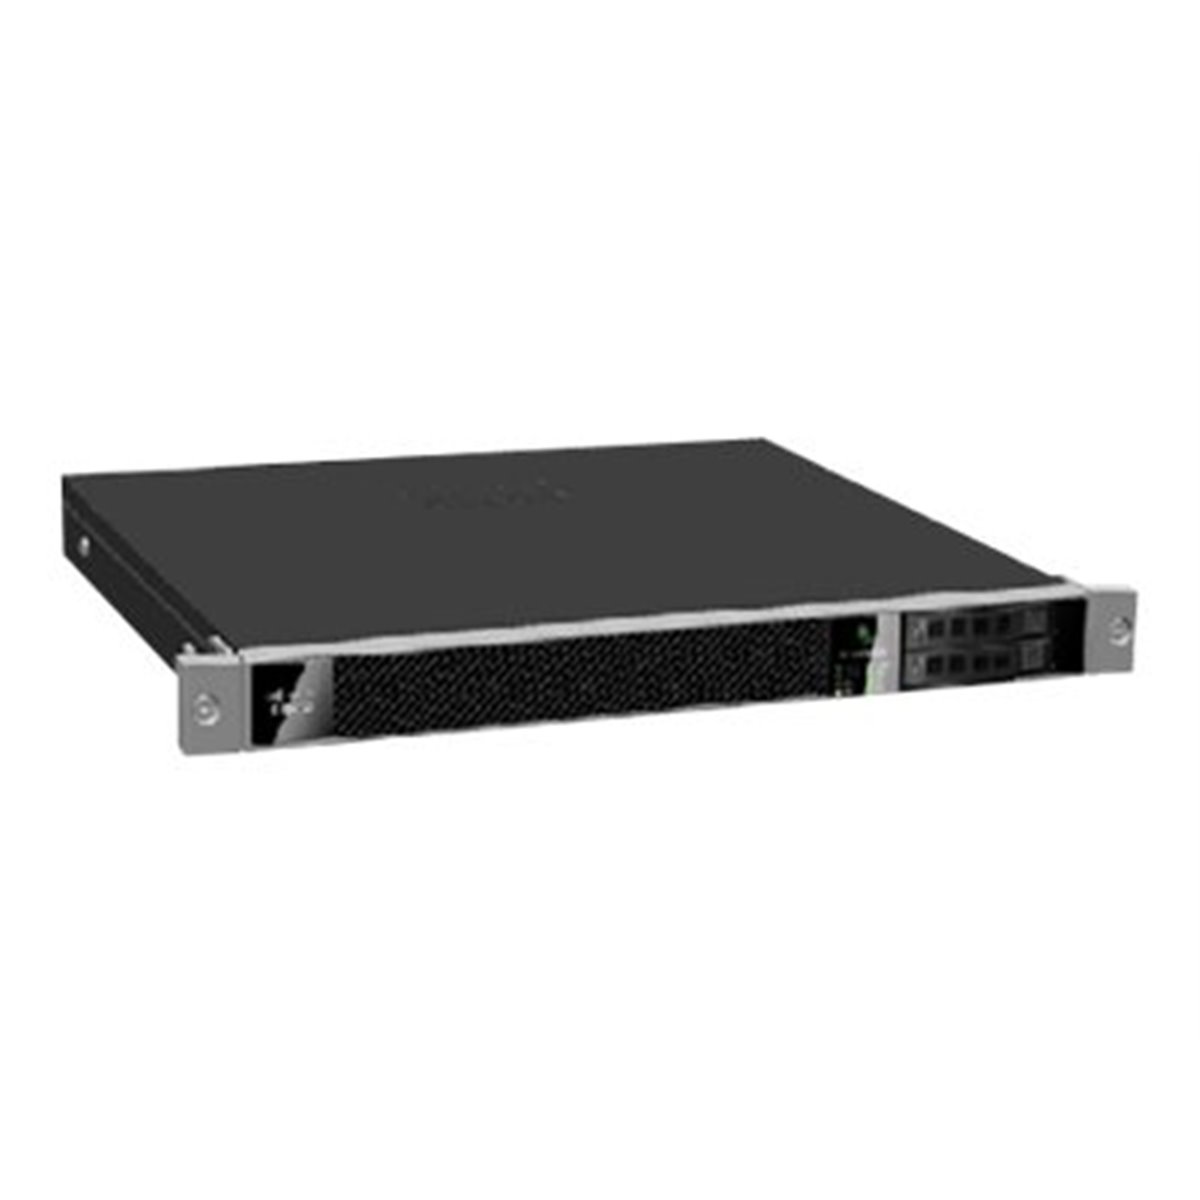 Cisco Wsa S170 Web Security Appliance with - Firewall